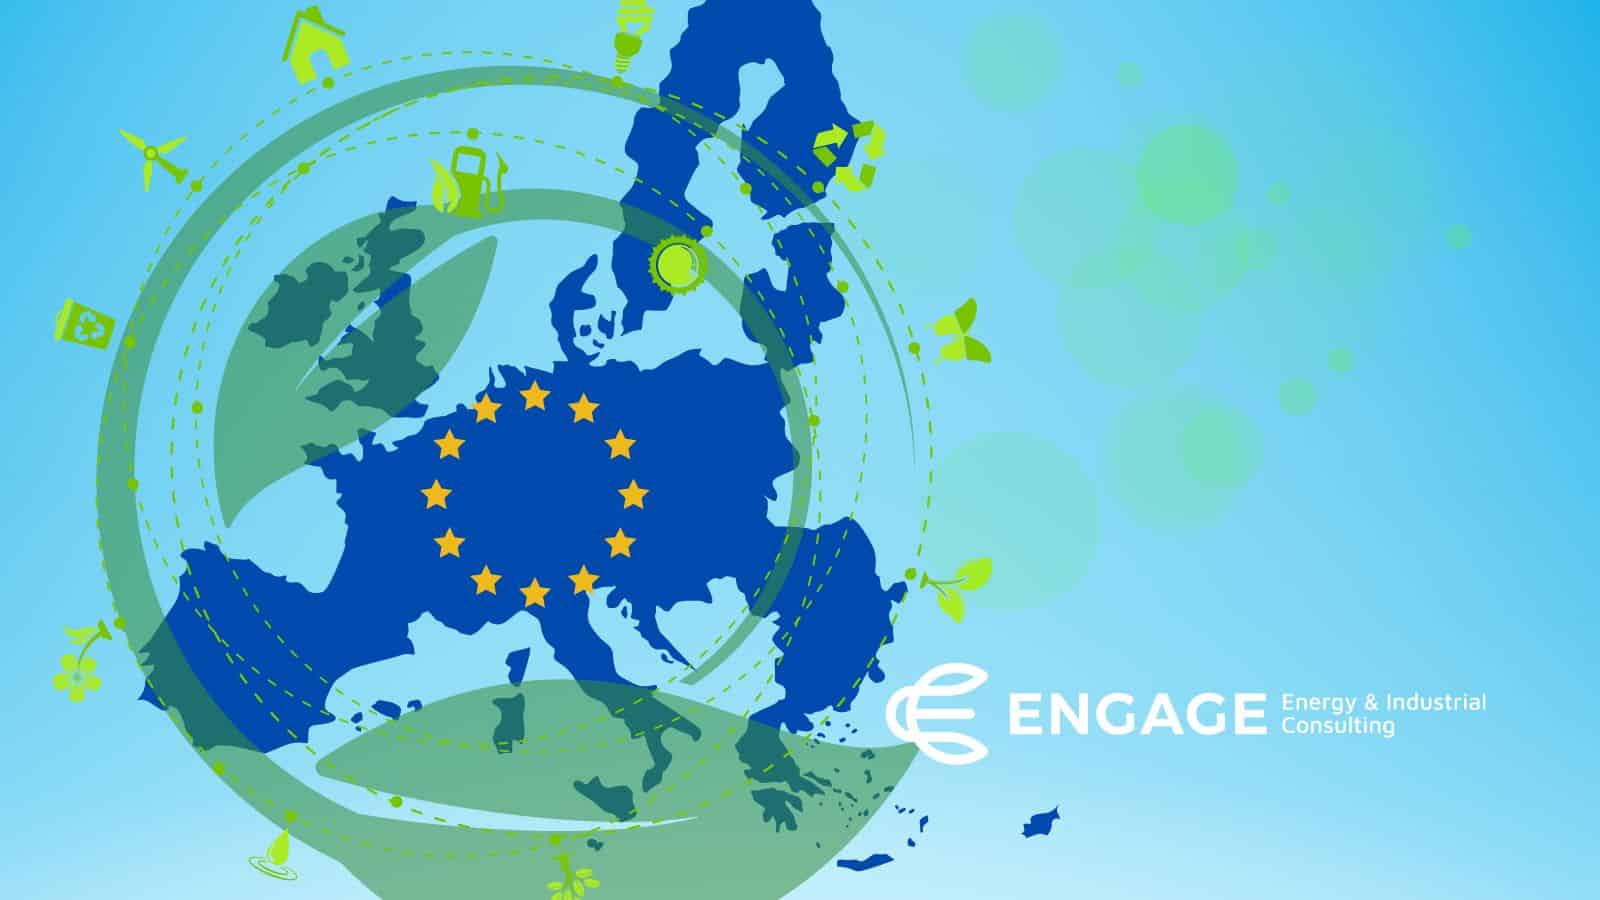 Europe shown in blue with the EU flag and EU ESG Reporting represented in green symbols around it.